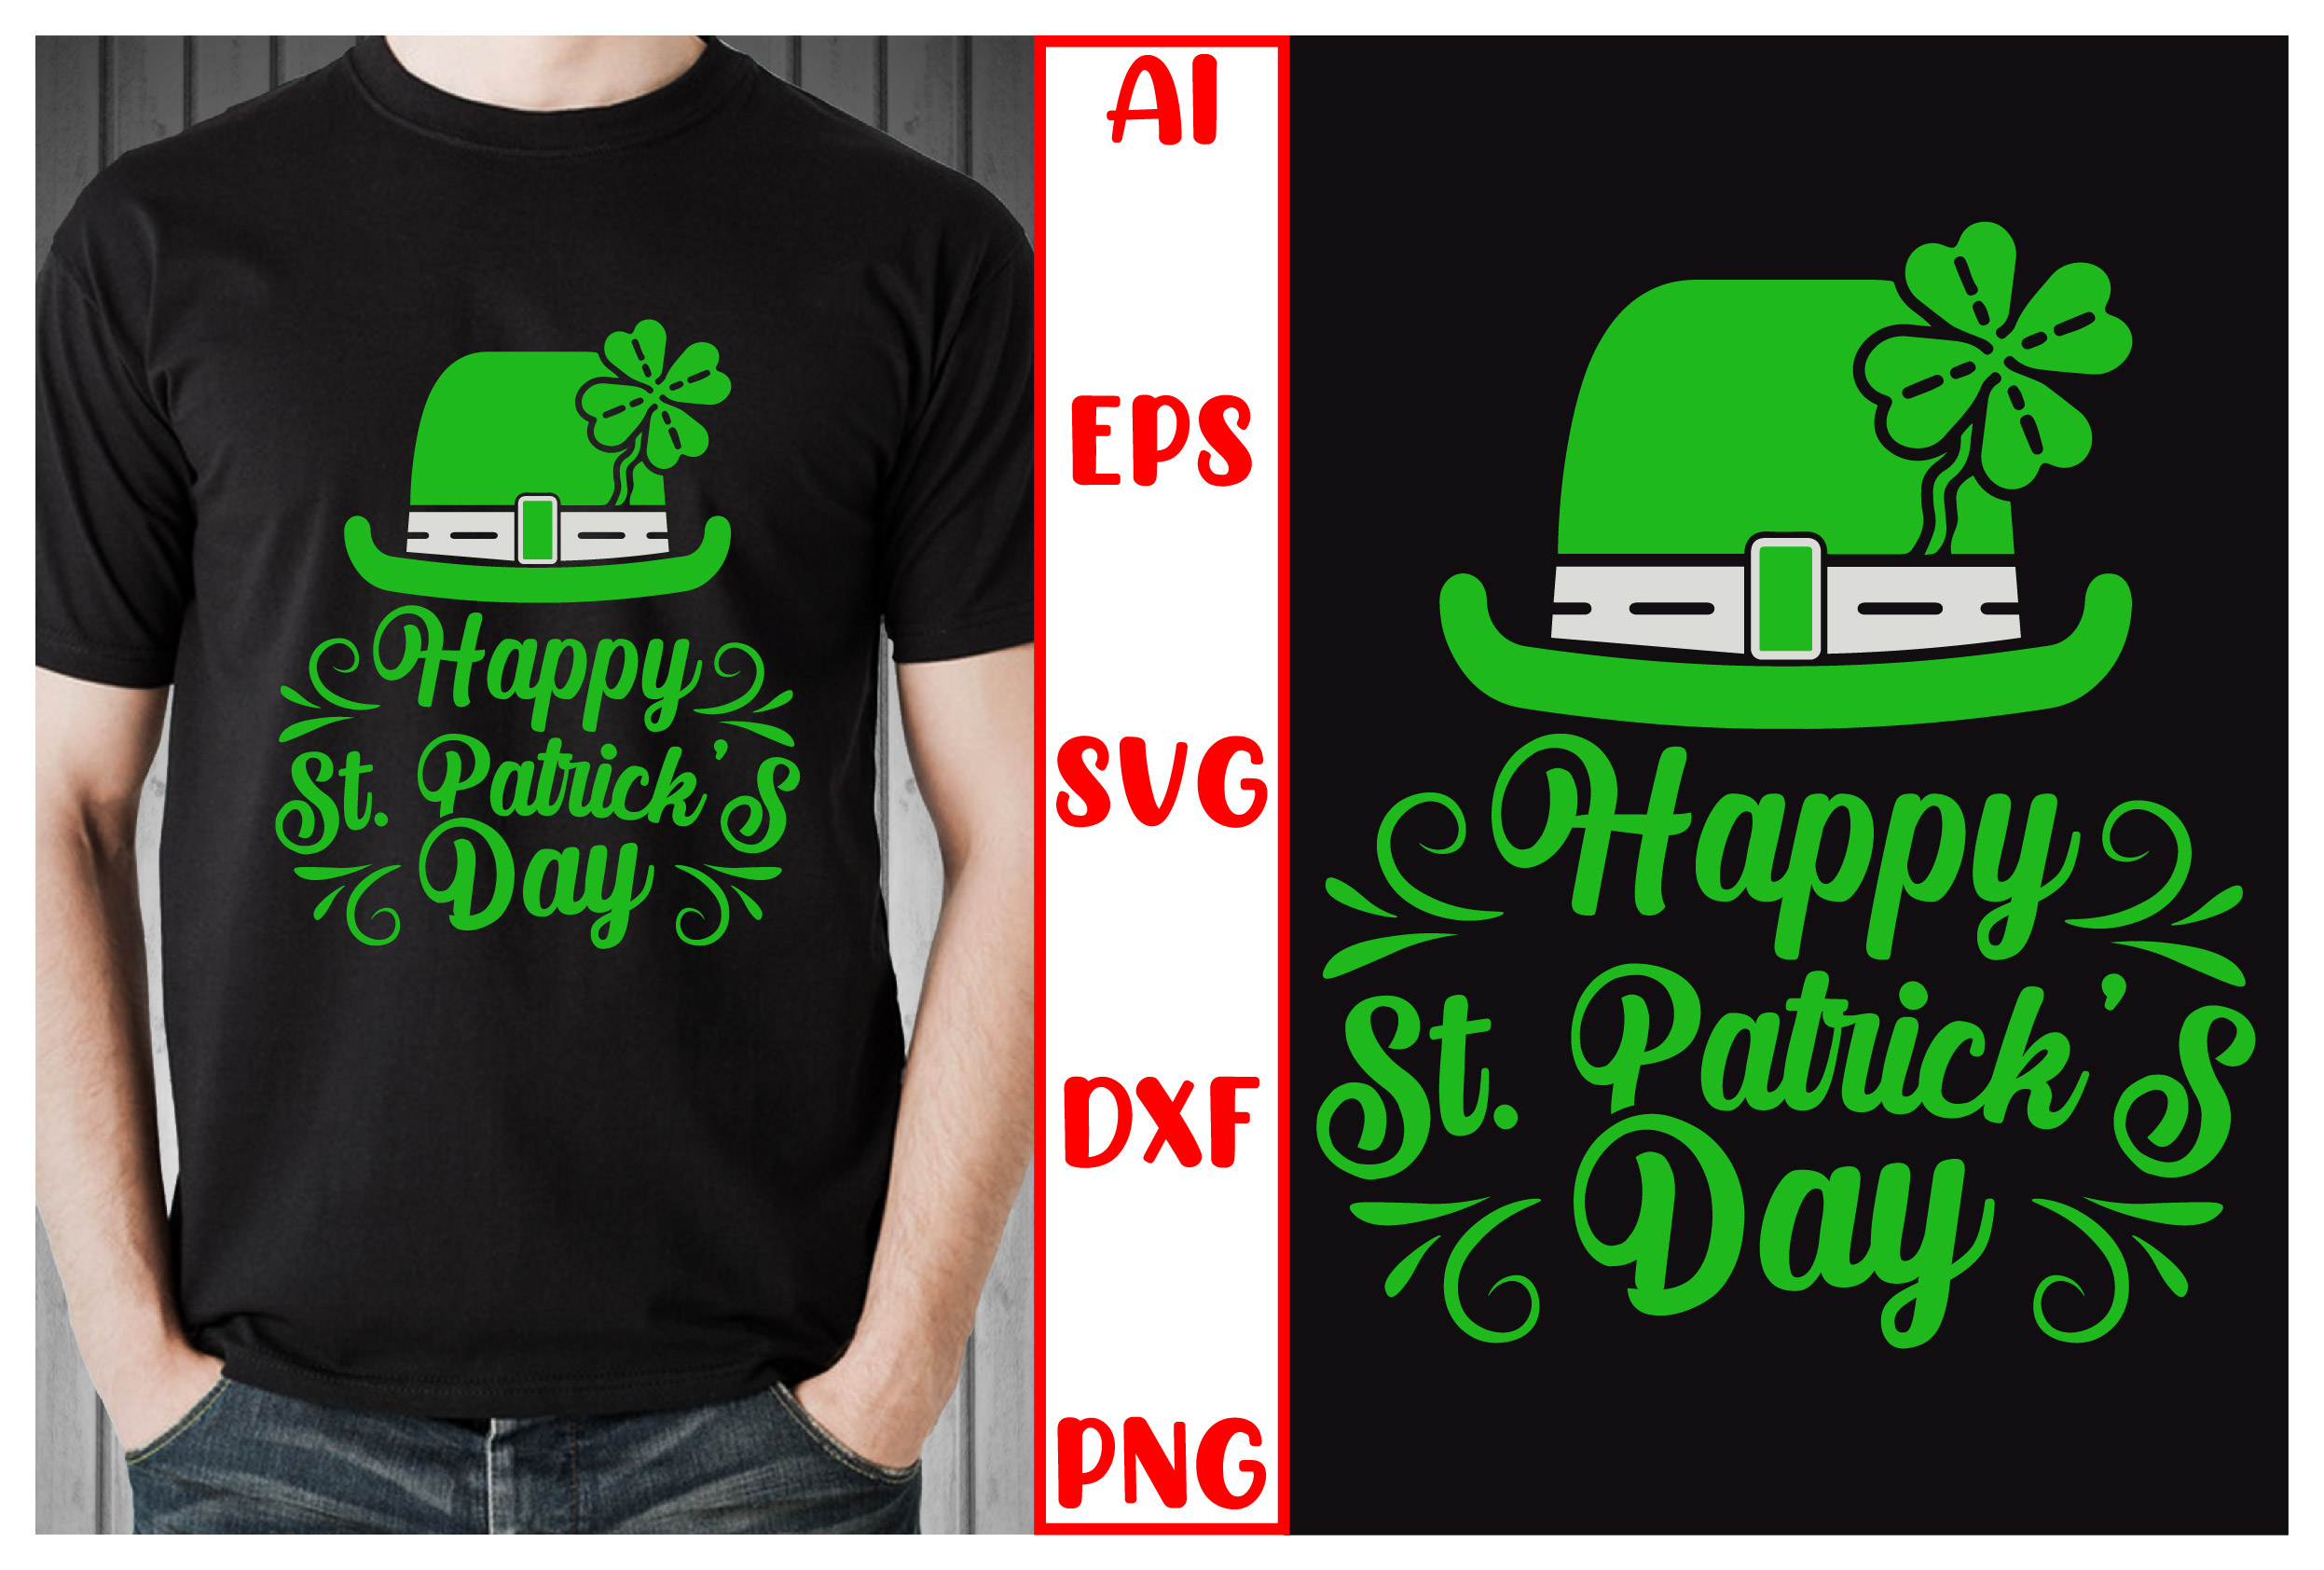 St patrick's day t - shirt with a shamrock hat.